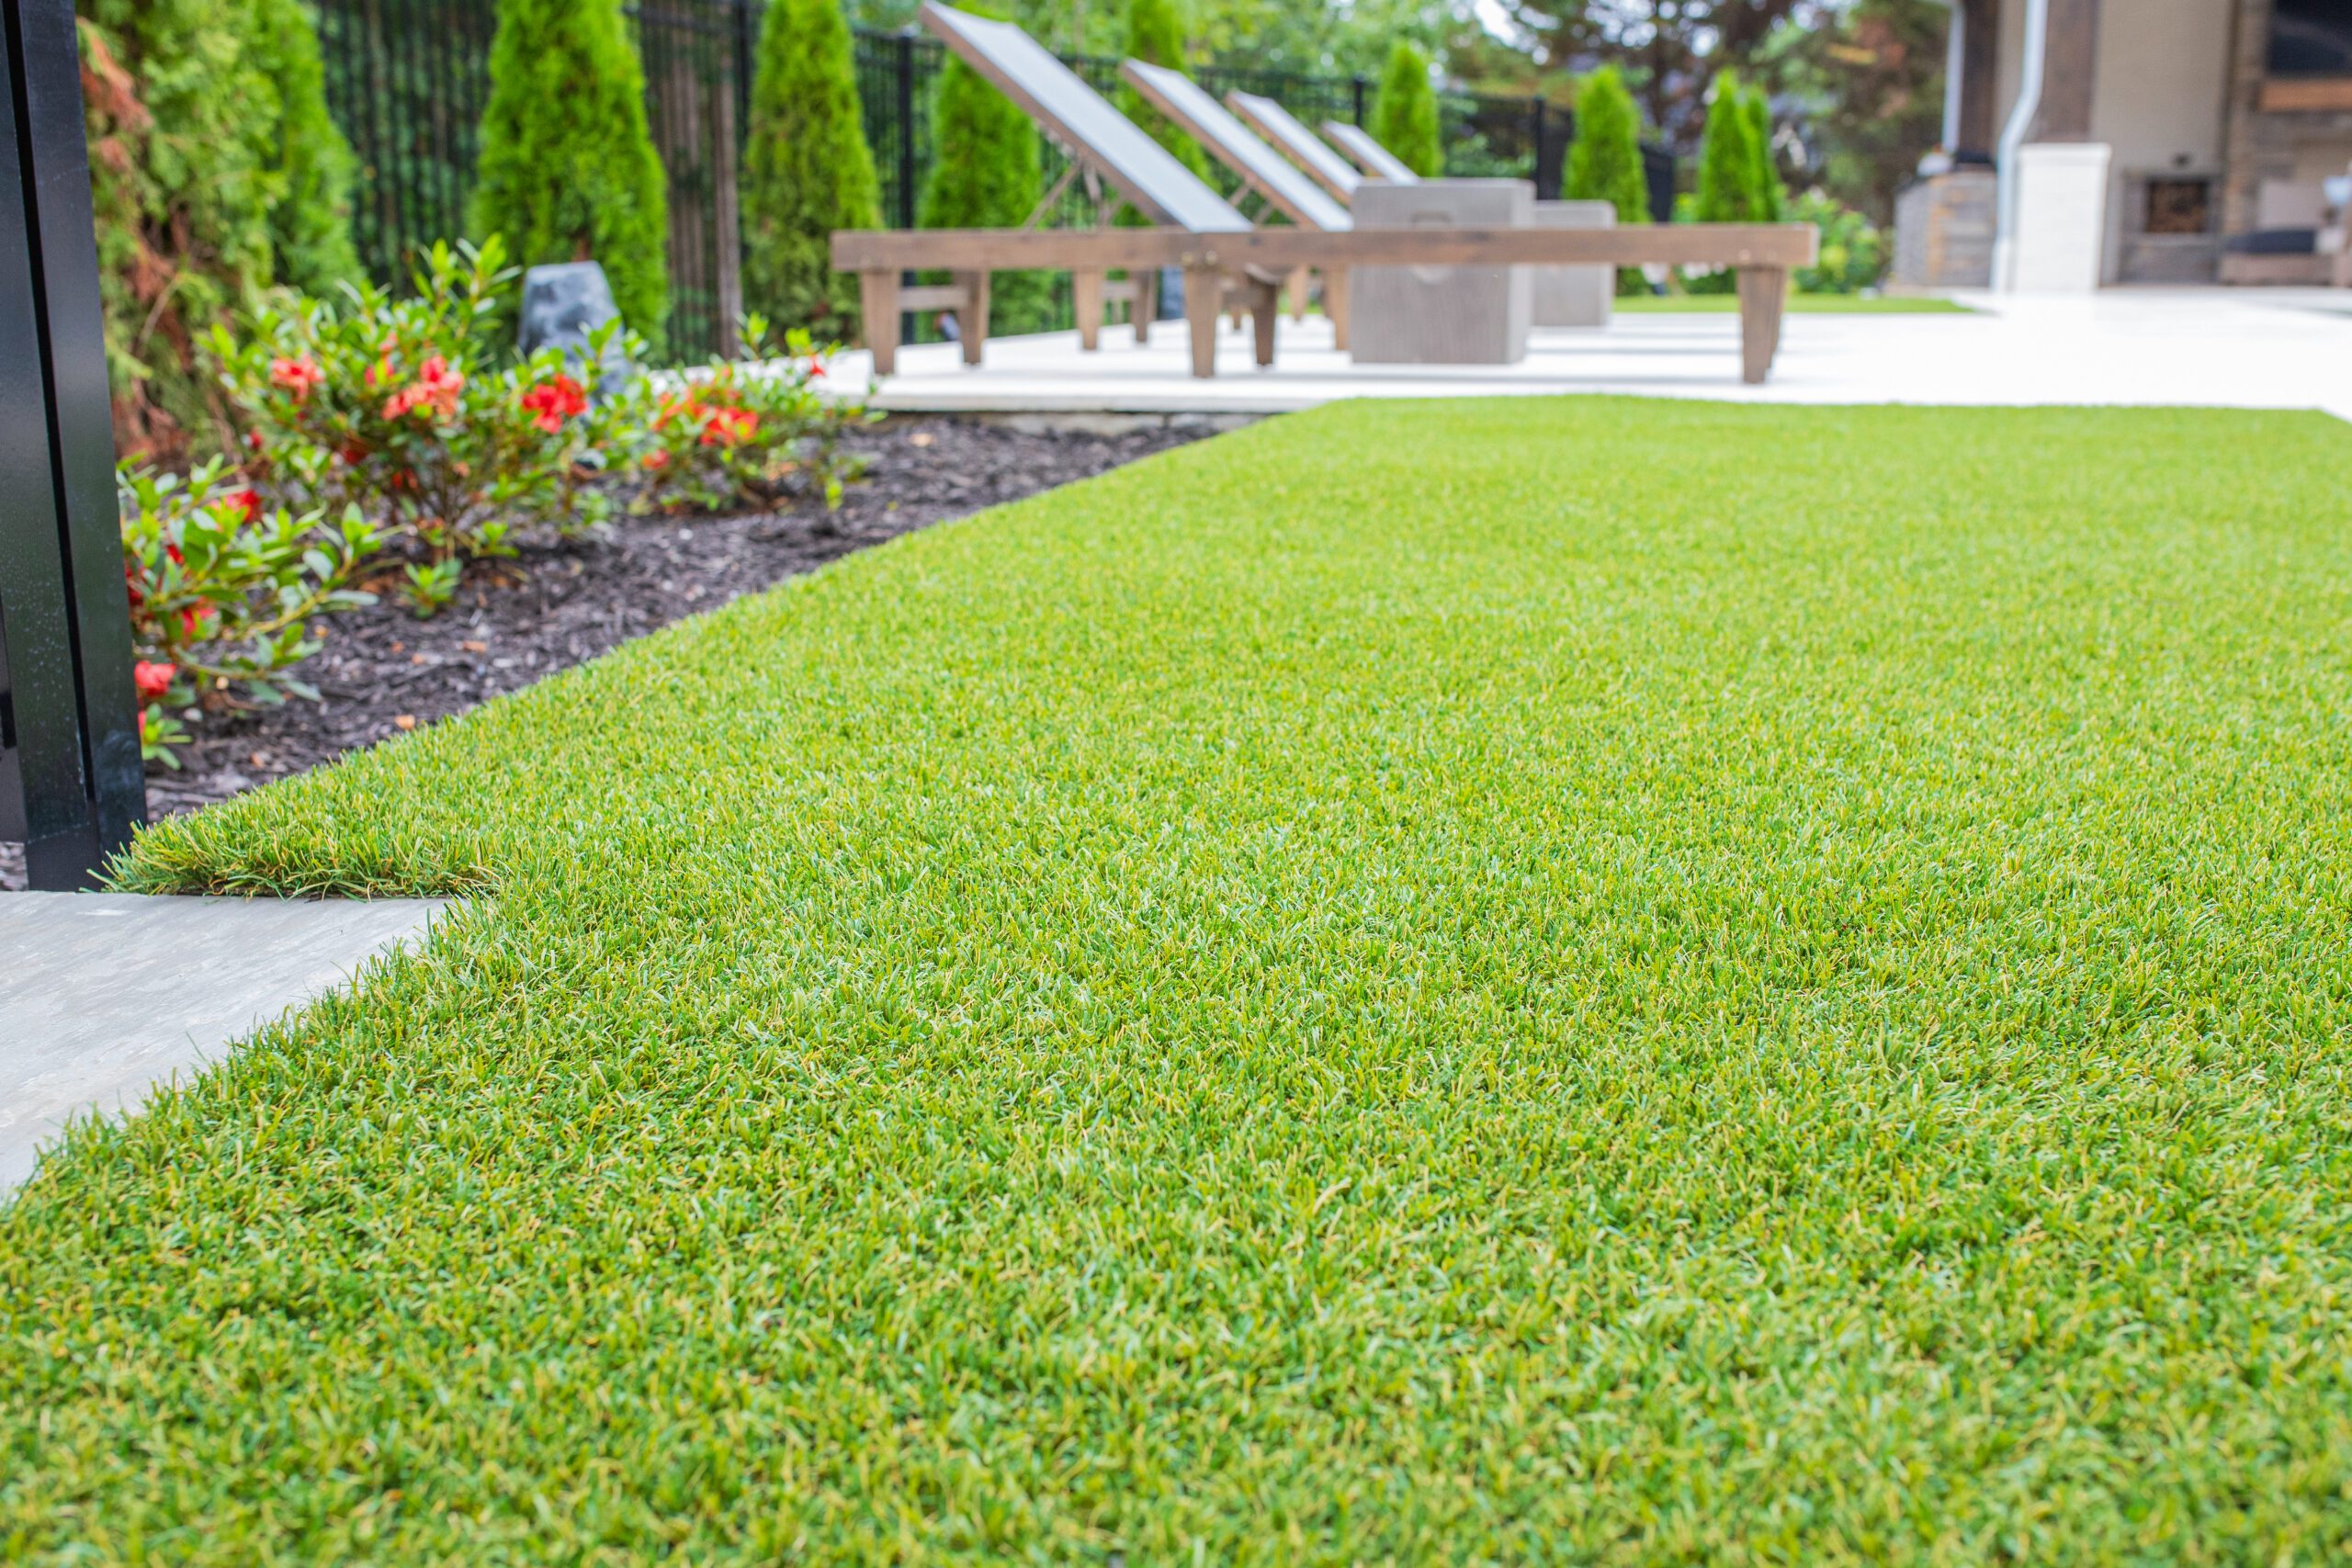 high quality synthetic turf in a backyard